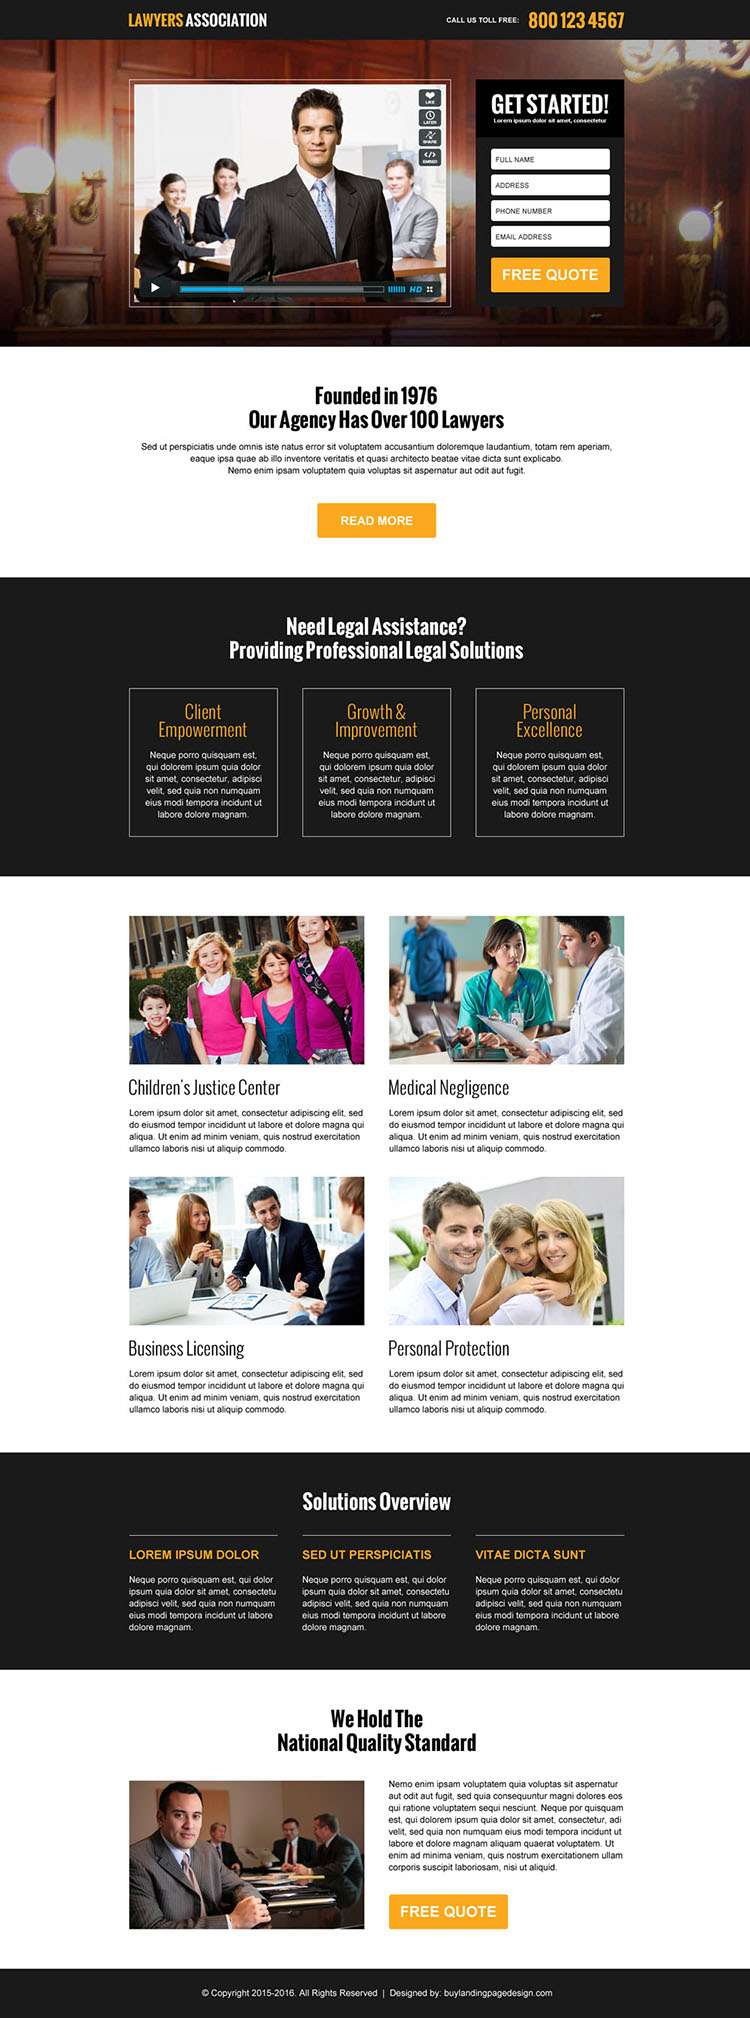 lawyers association responsive video landing page design template